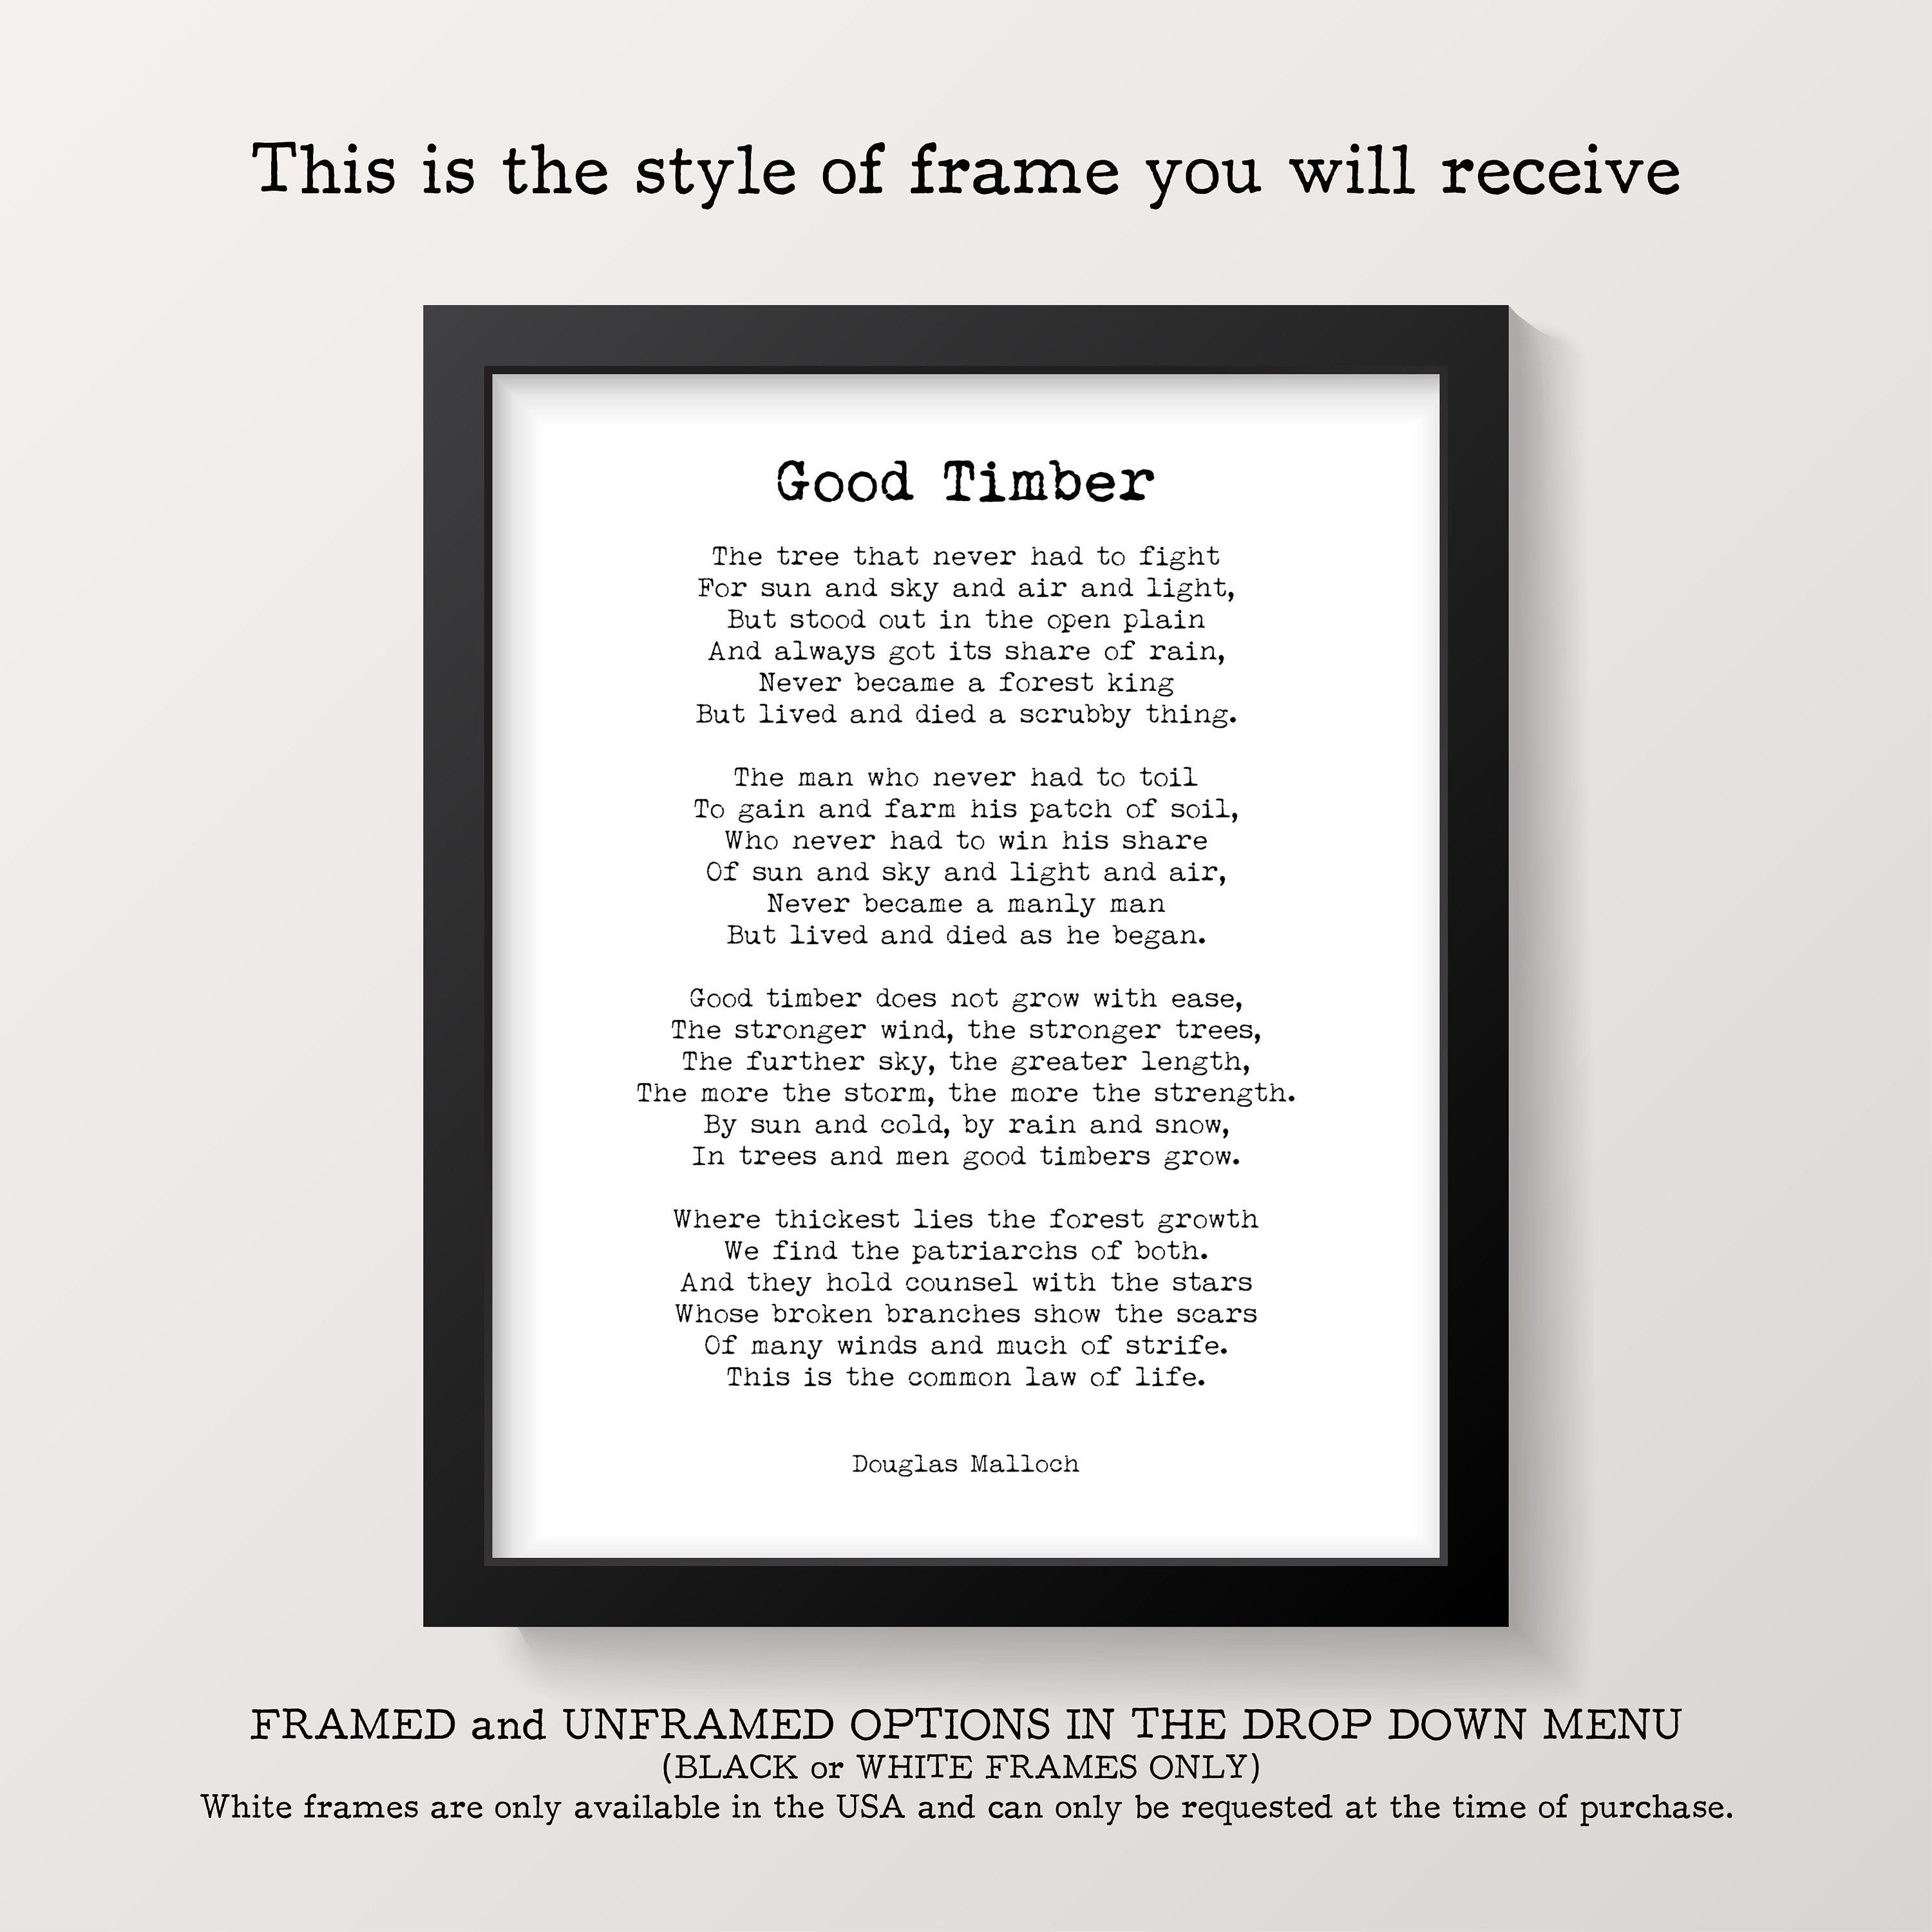 Anthony Bourdain Travel Changes You Unframed Black & White Quote Print